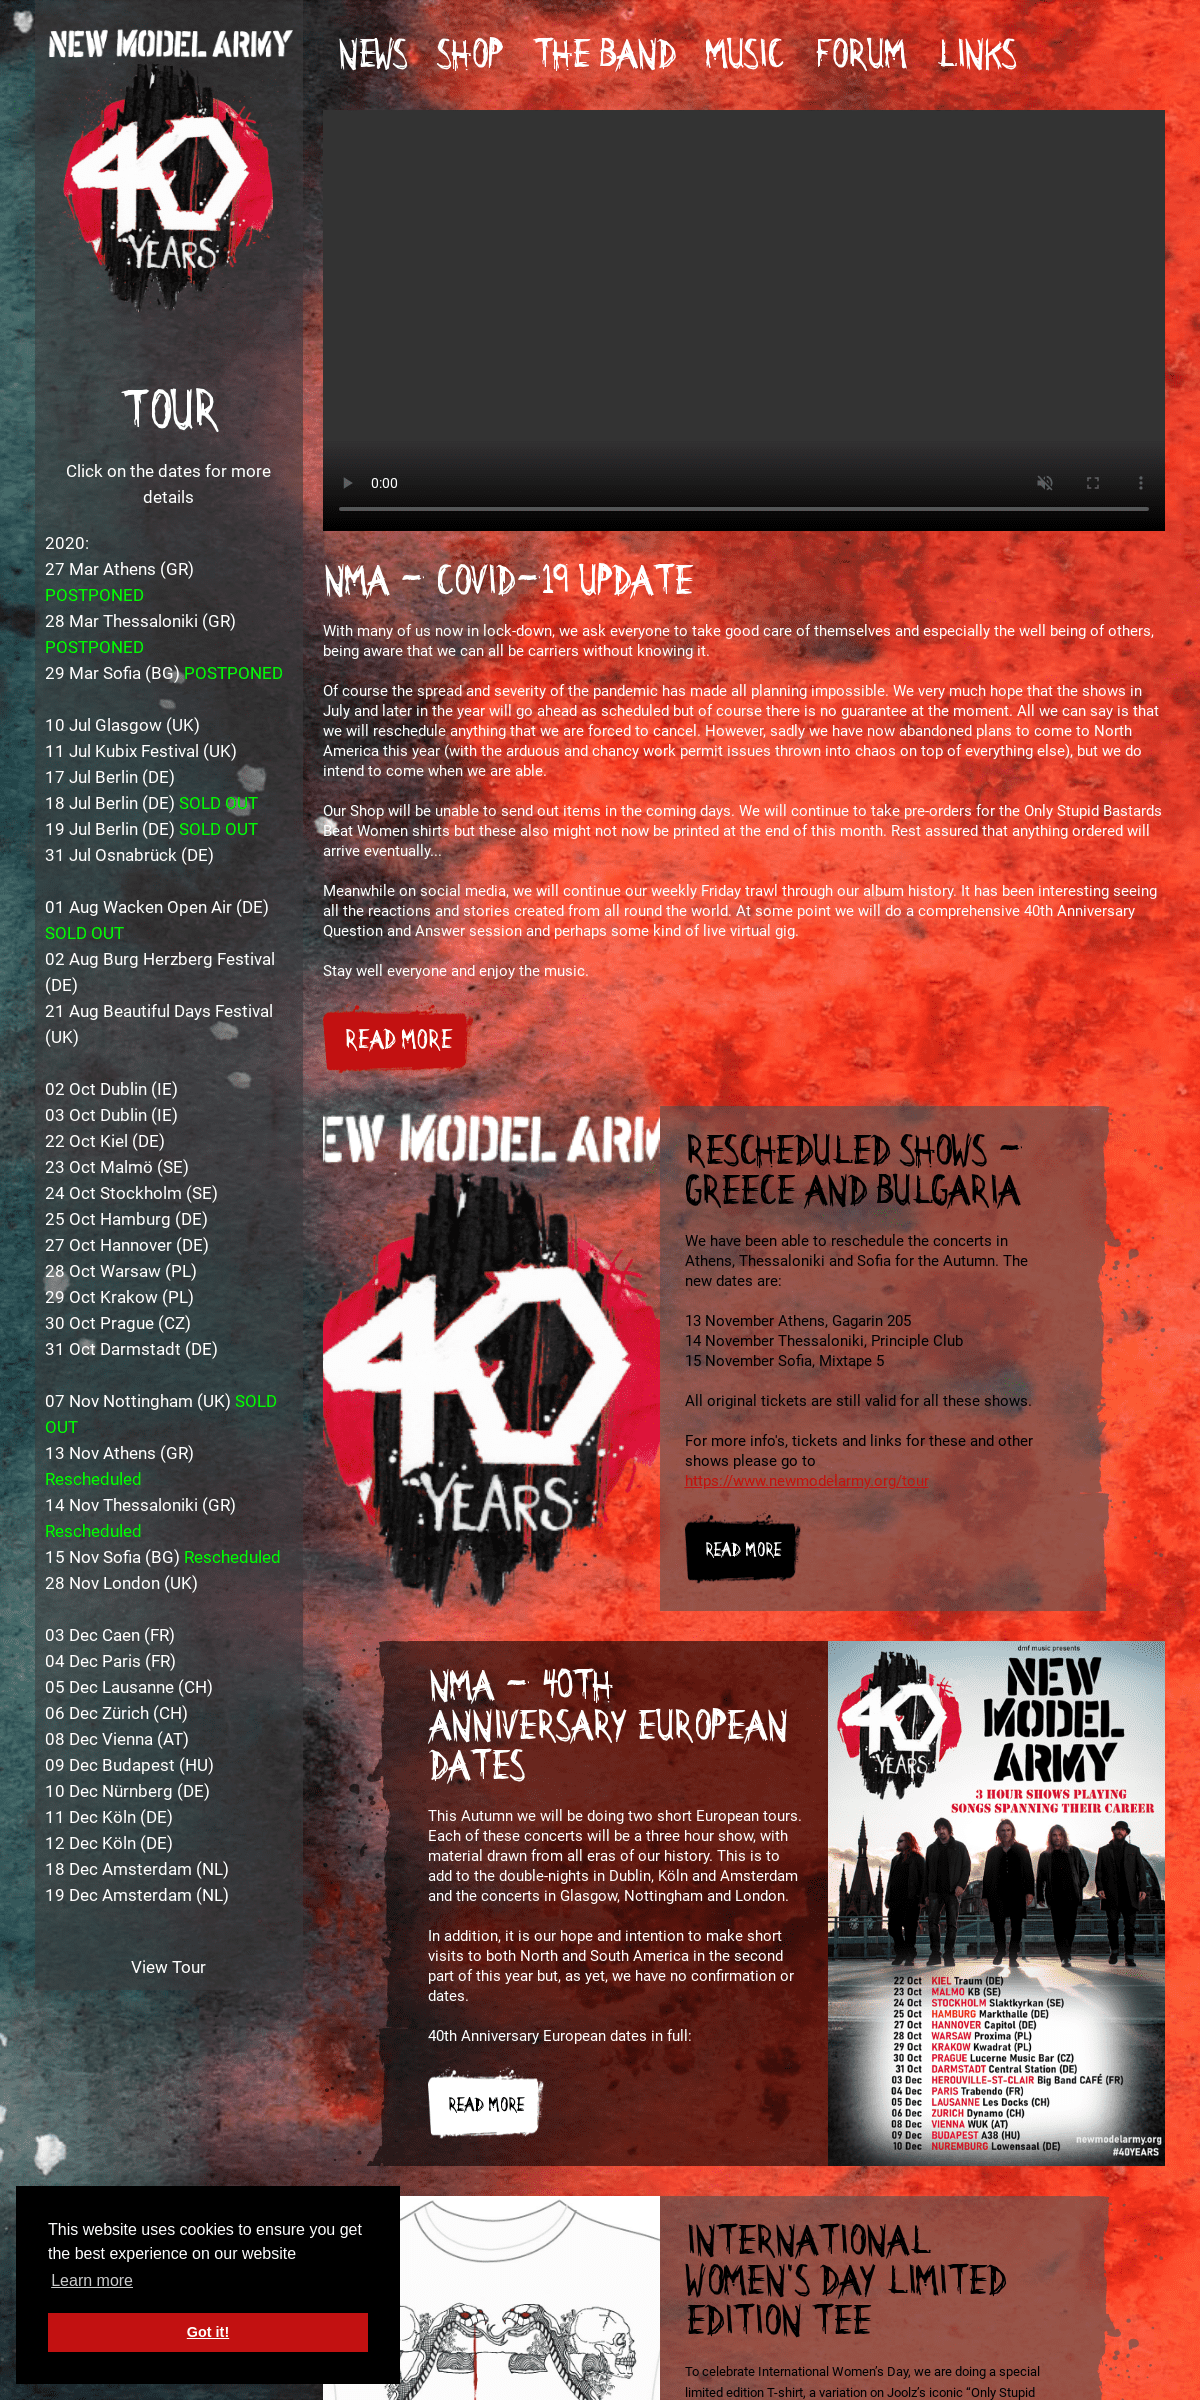 A complete backup of newmodelarmy.org